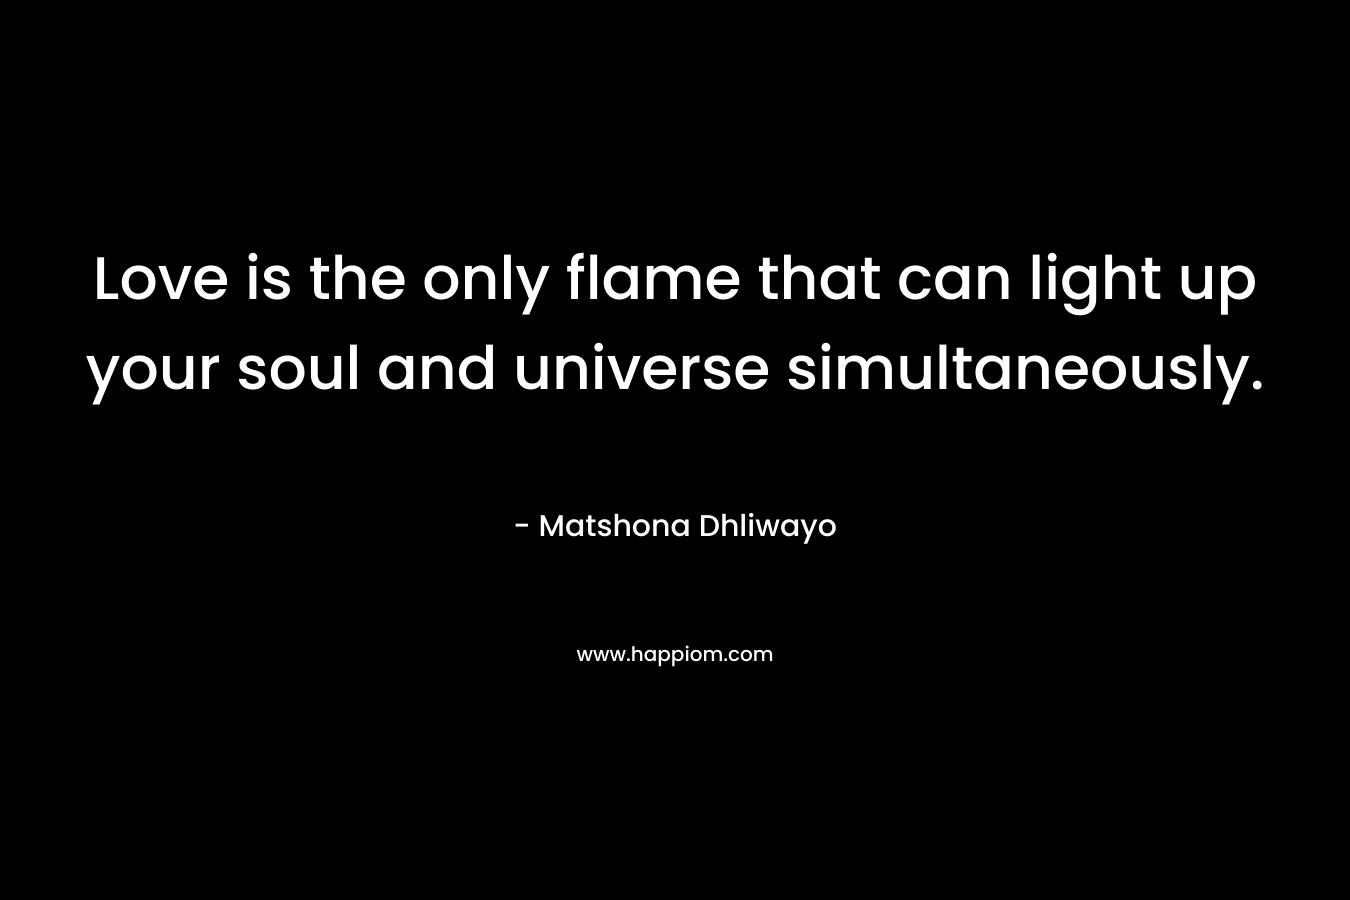 Love is the only flame that can light up your soul and universe simultaneously.